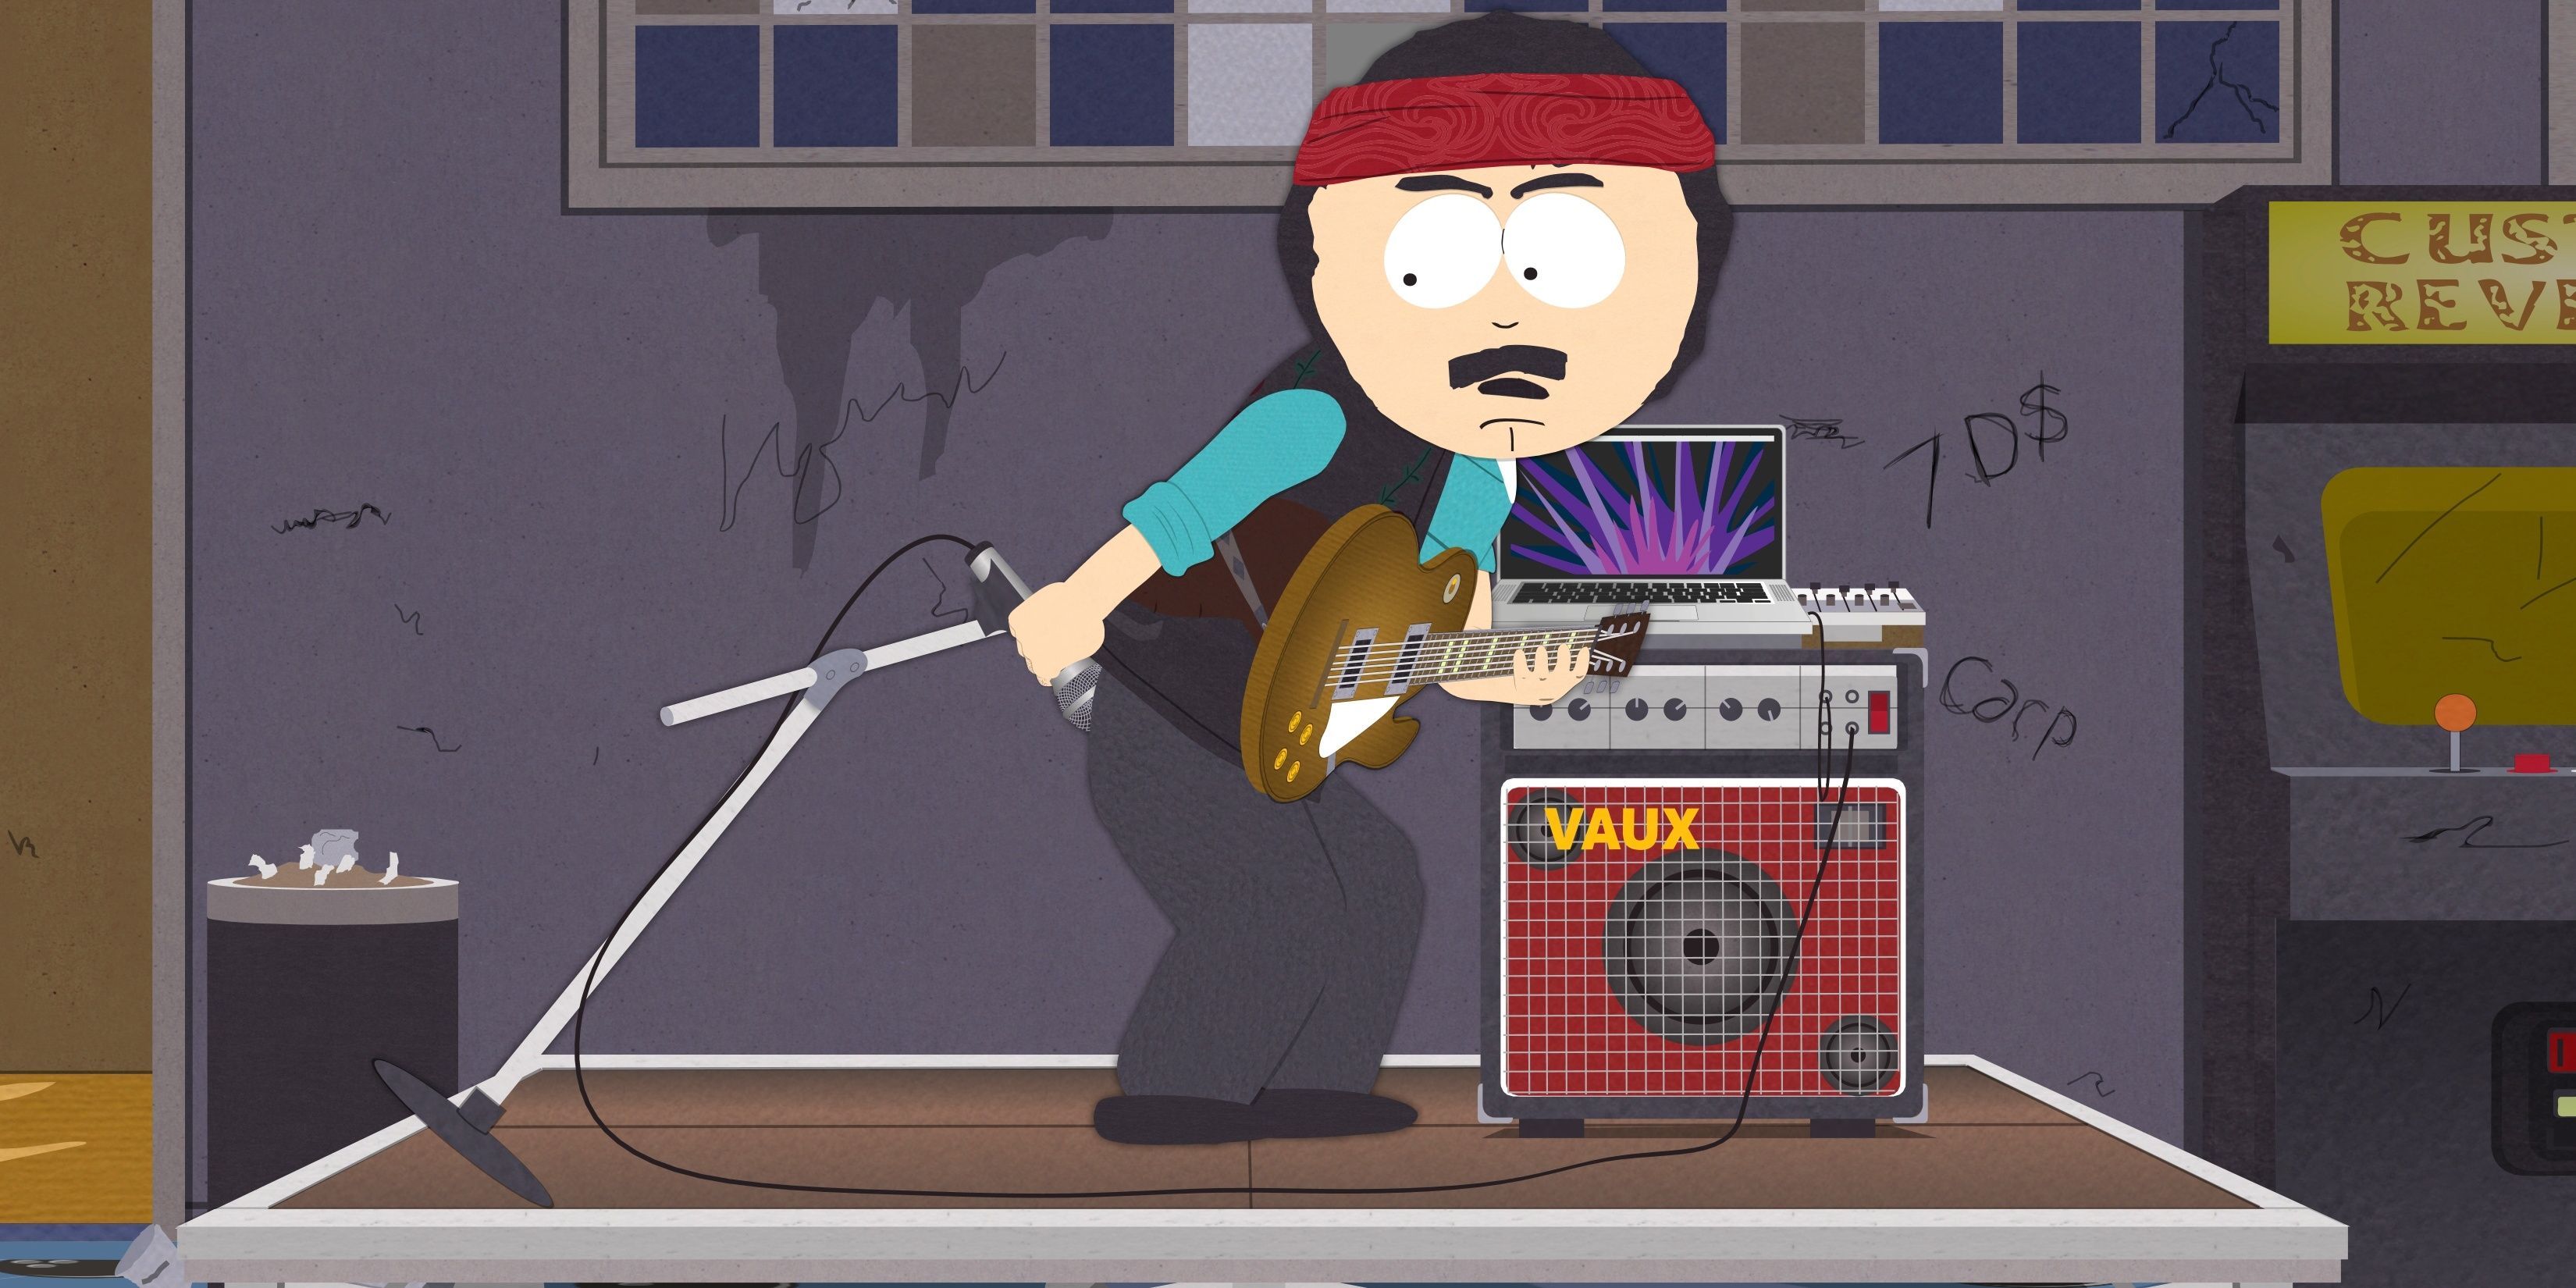 Randy from South Park farting into a microphone.